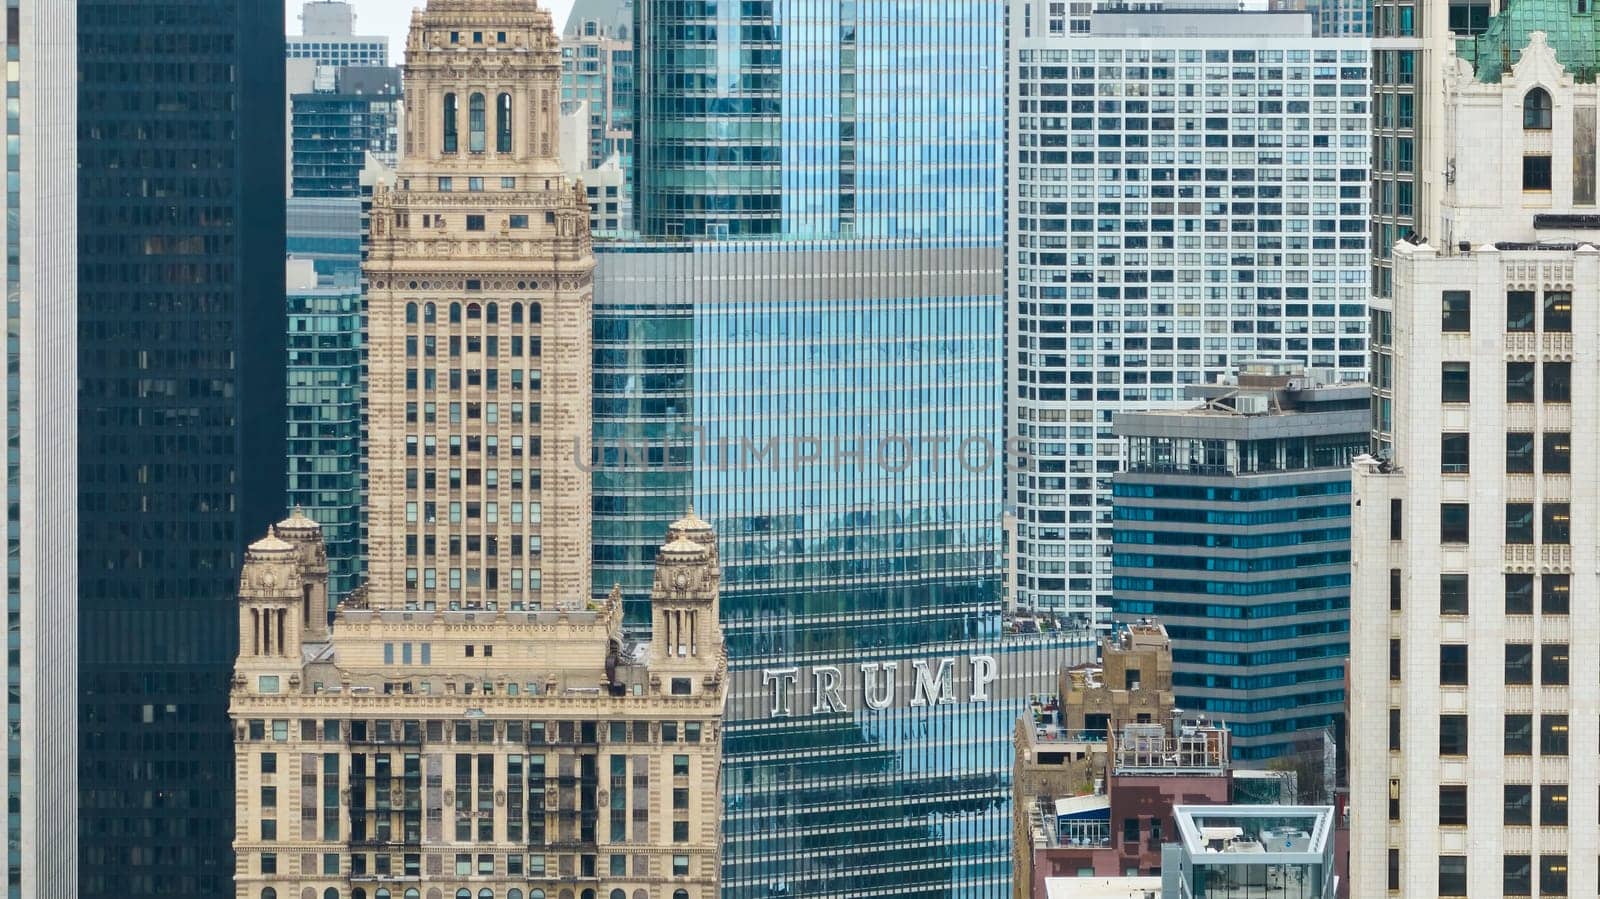 Image of Trump on Trump Tower aerial of Chicago downtown buildings and skyscrapers, tourism in big city